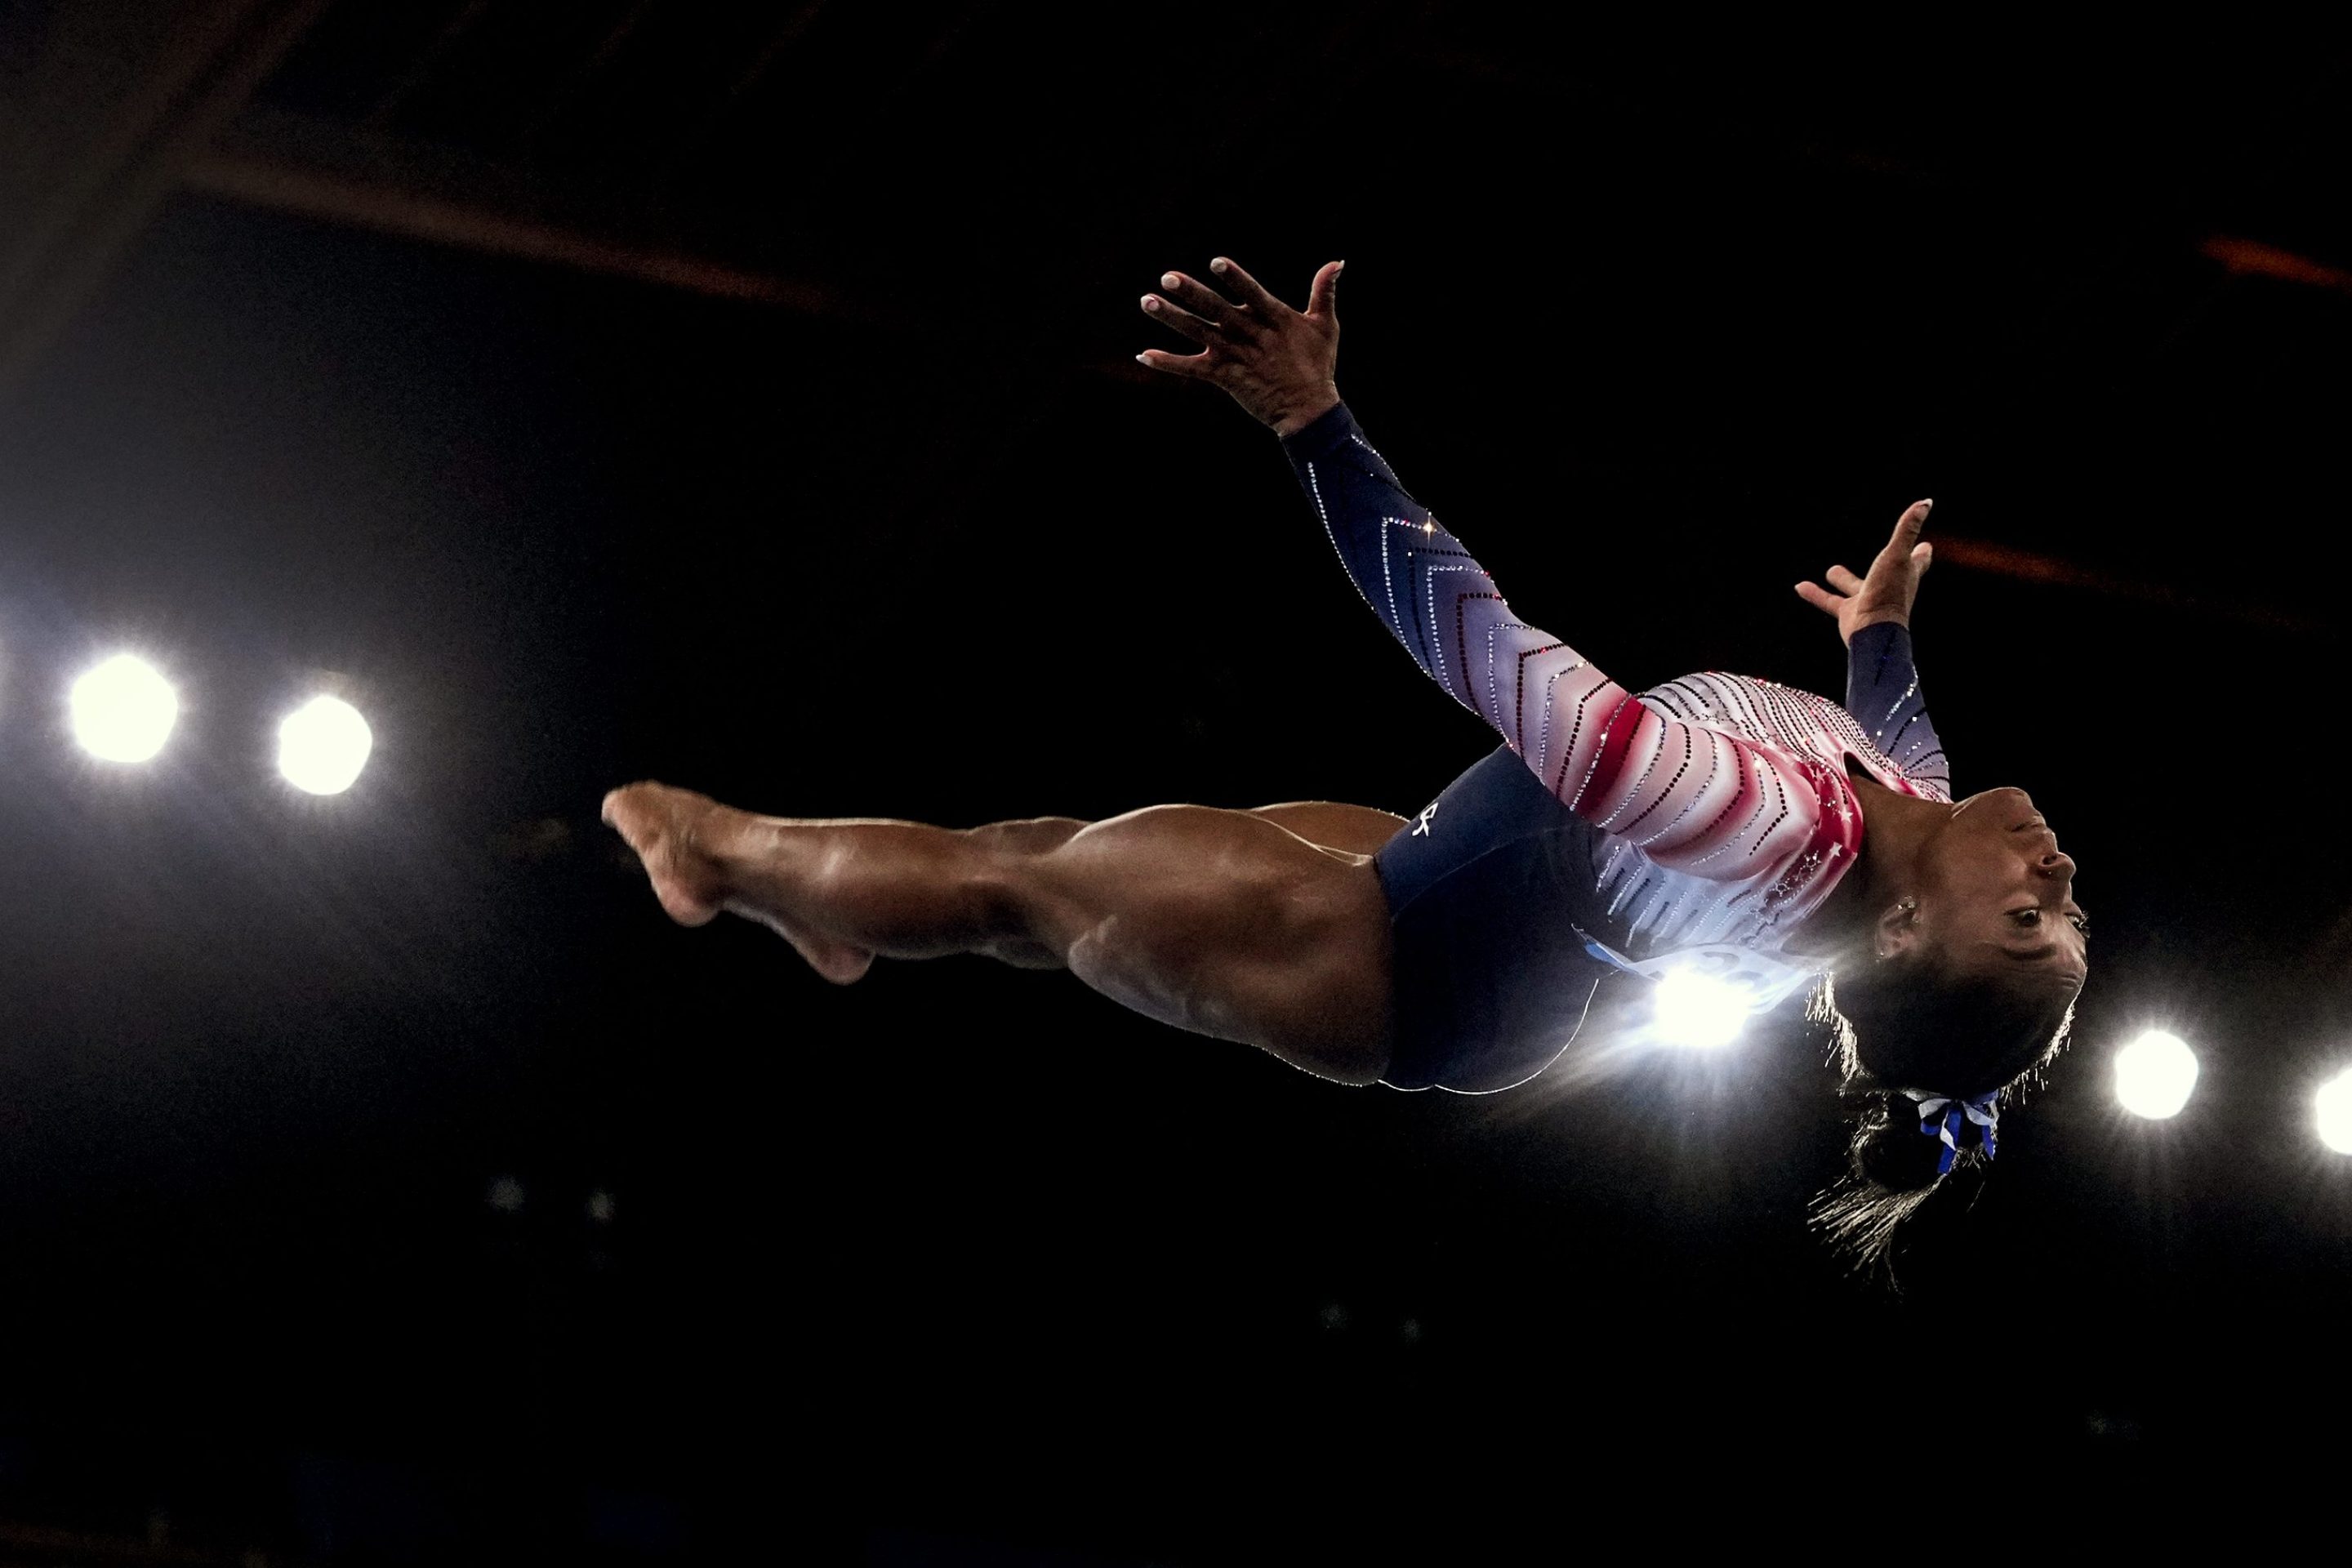 Gymnast Simone Biles of Team United States flips through the air as performs her dismount during the Tokyo 2020 Olympic Games Women's Gymnastics Balance Beam Final at Ariake Gymnastics Center on Tuesday, August 3, 2021